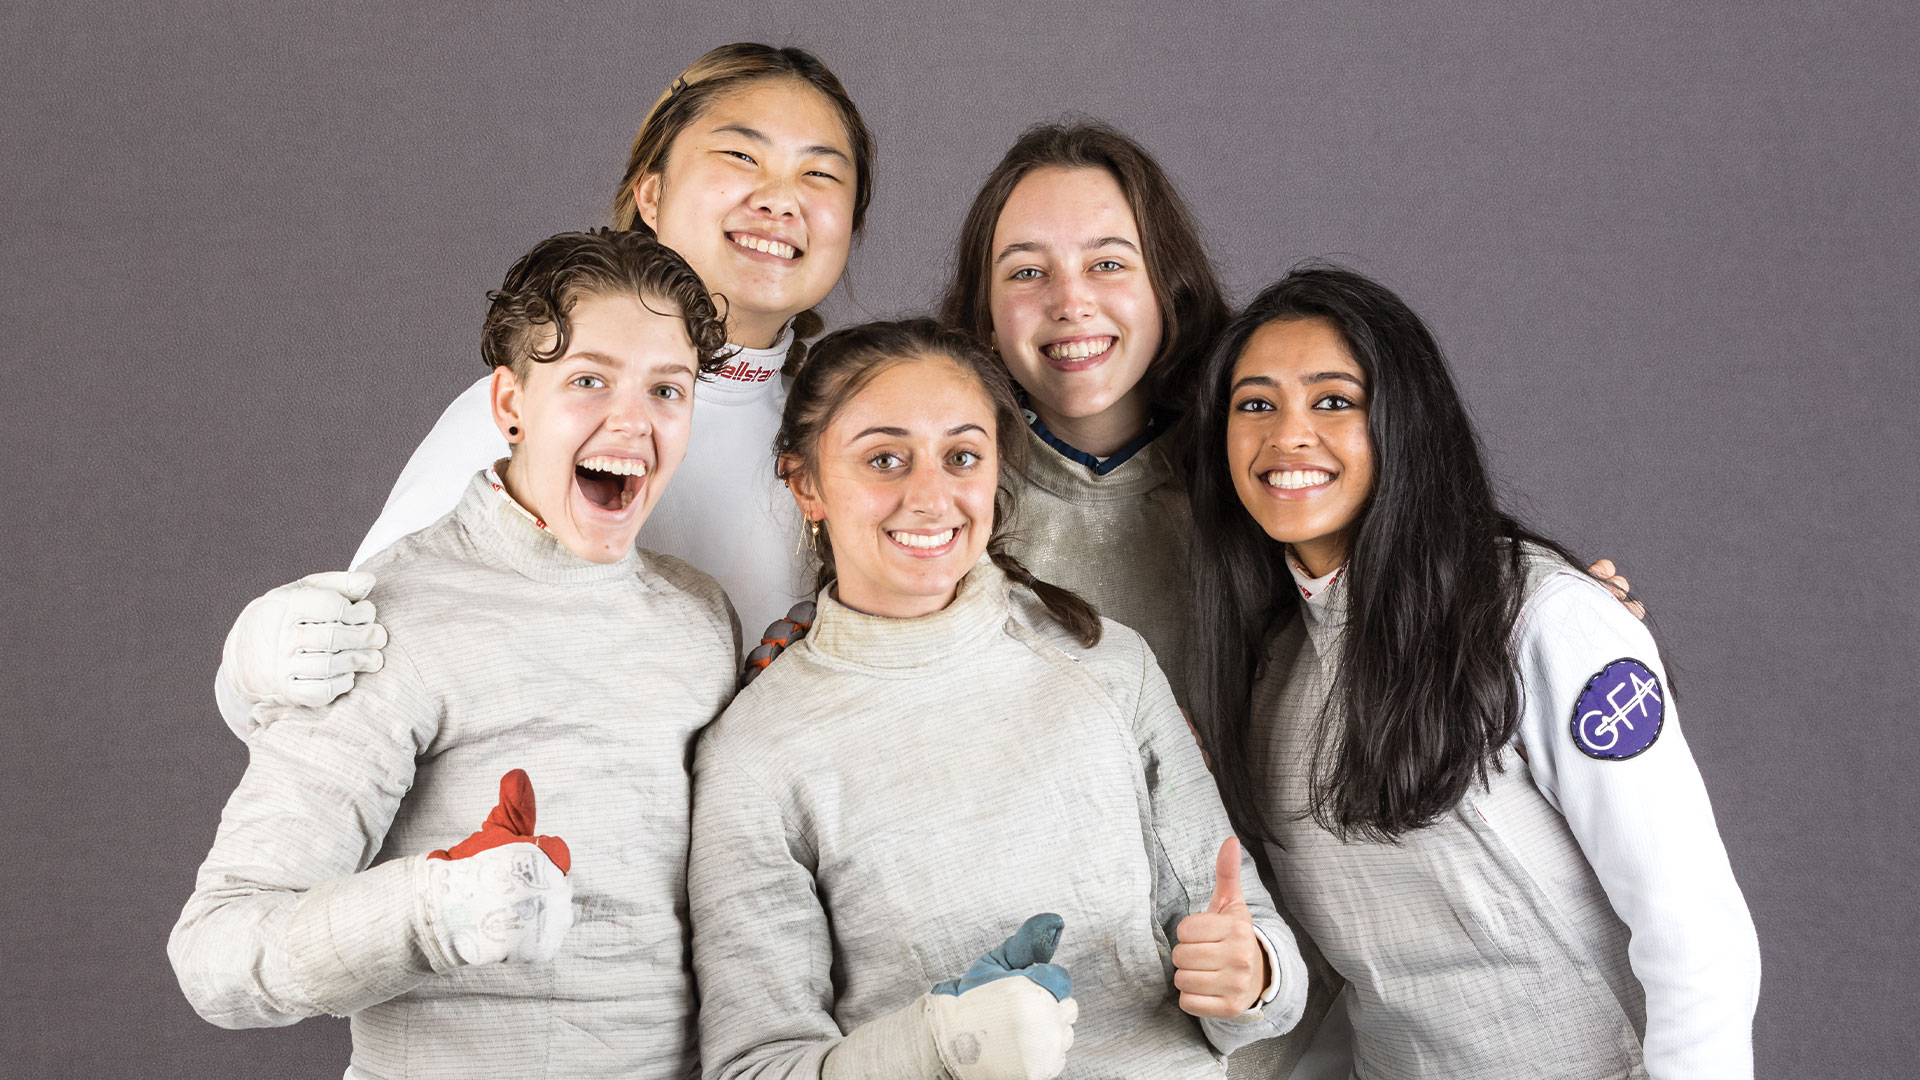 Wellesley fencing is ranked 6th in latest coaches poll (Frank Poulin Photography)